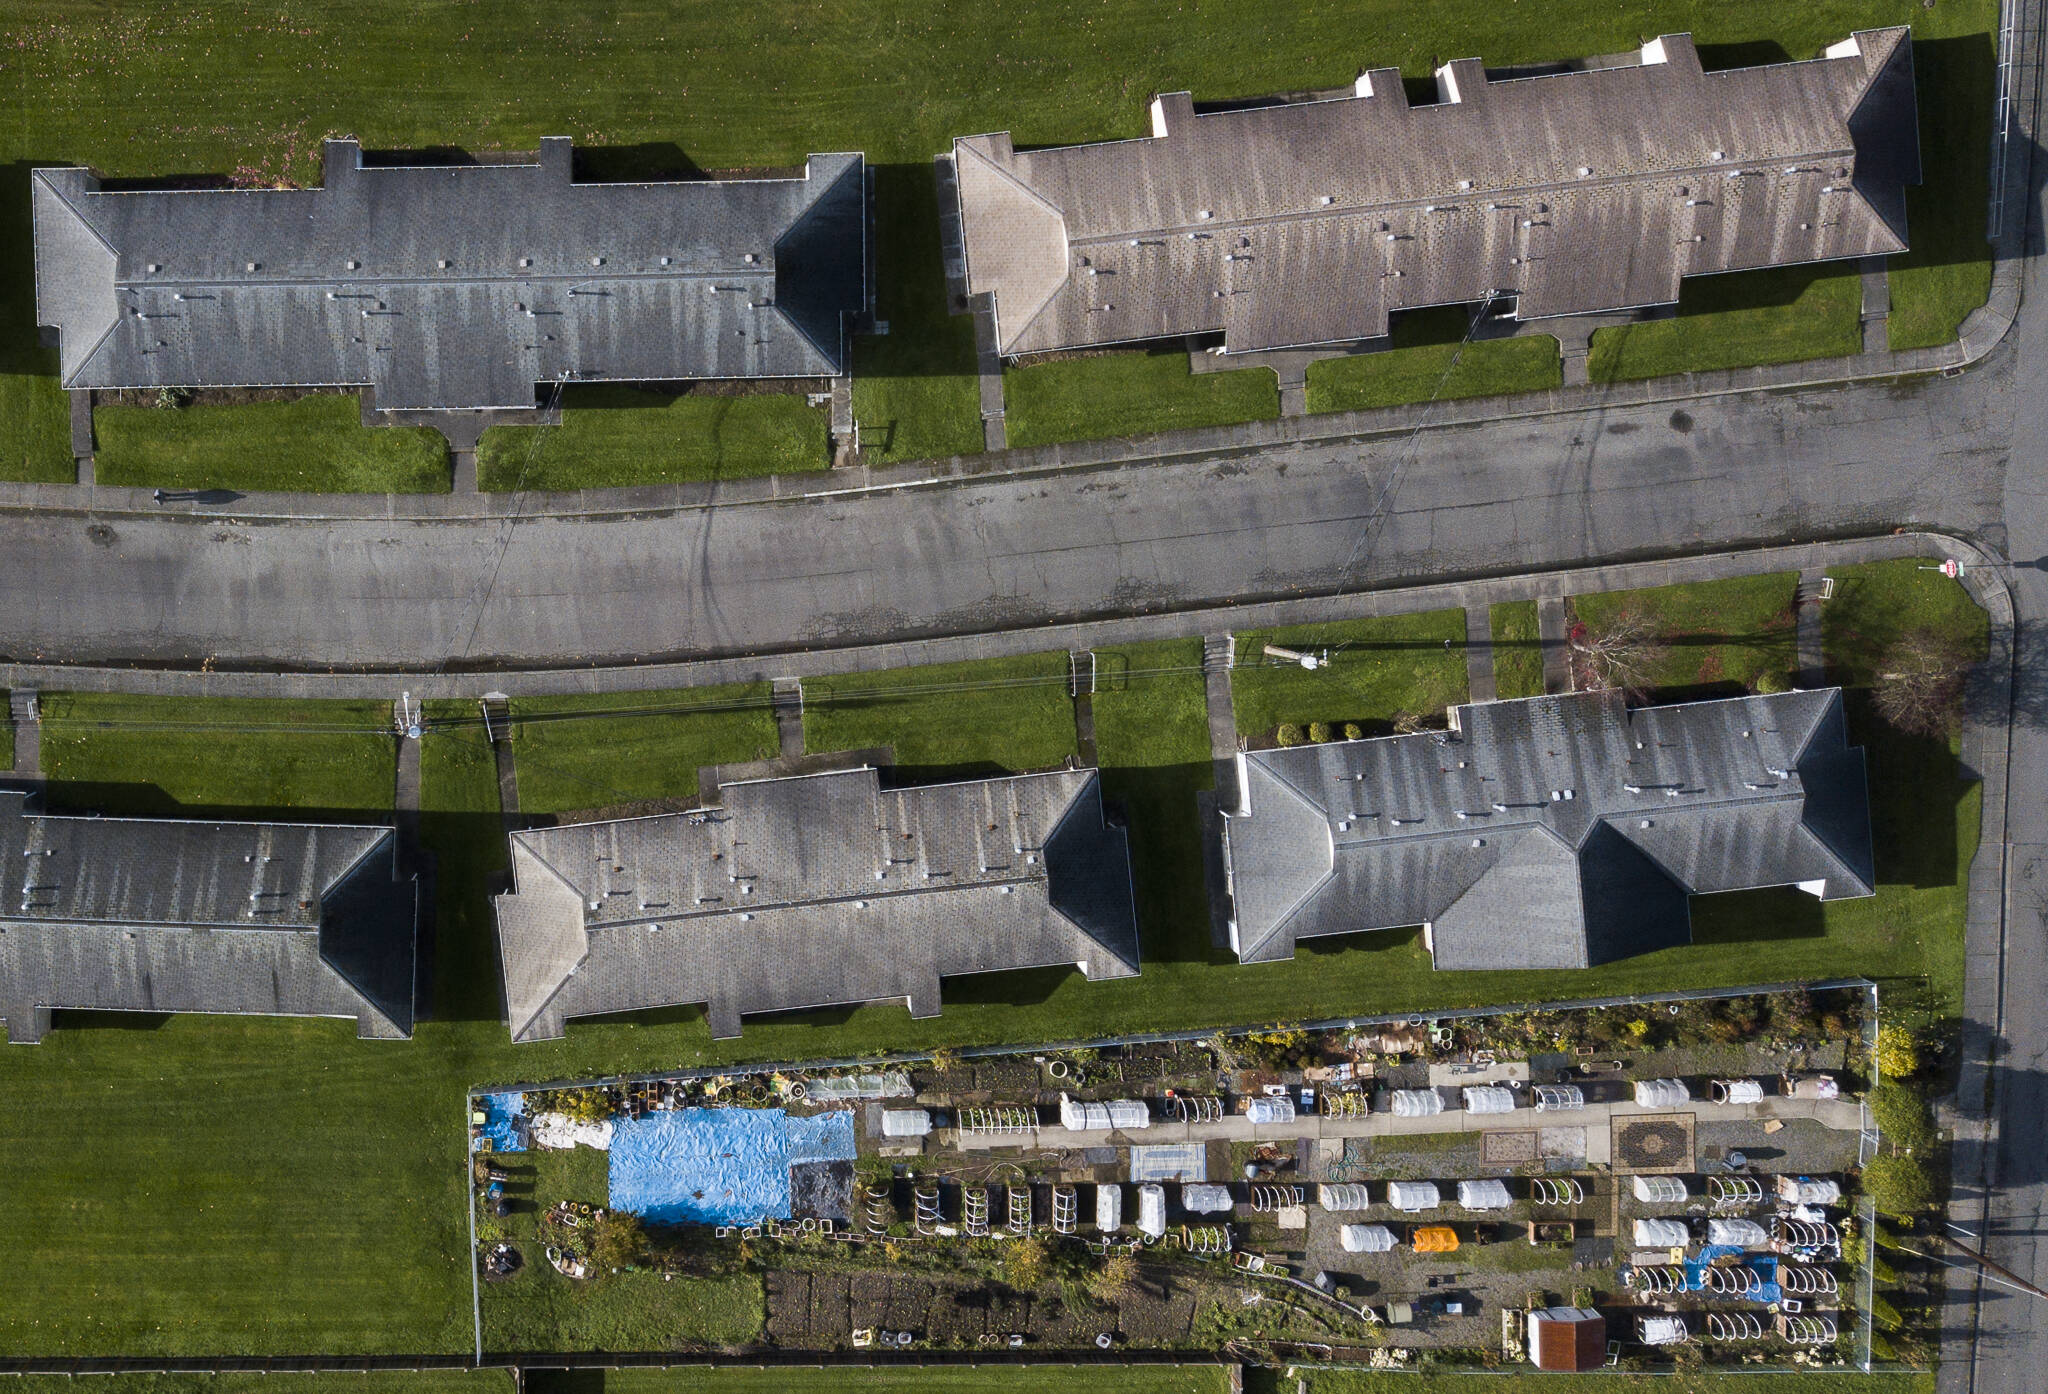 The Friendship Garden’s 40 garden boxes along 12th Street in Everett, shared by Baker Heights and Delta neighborhood residents, seen from overhead. (Olivia Vanni / The Herald)